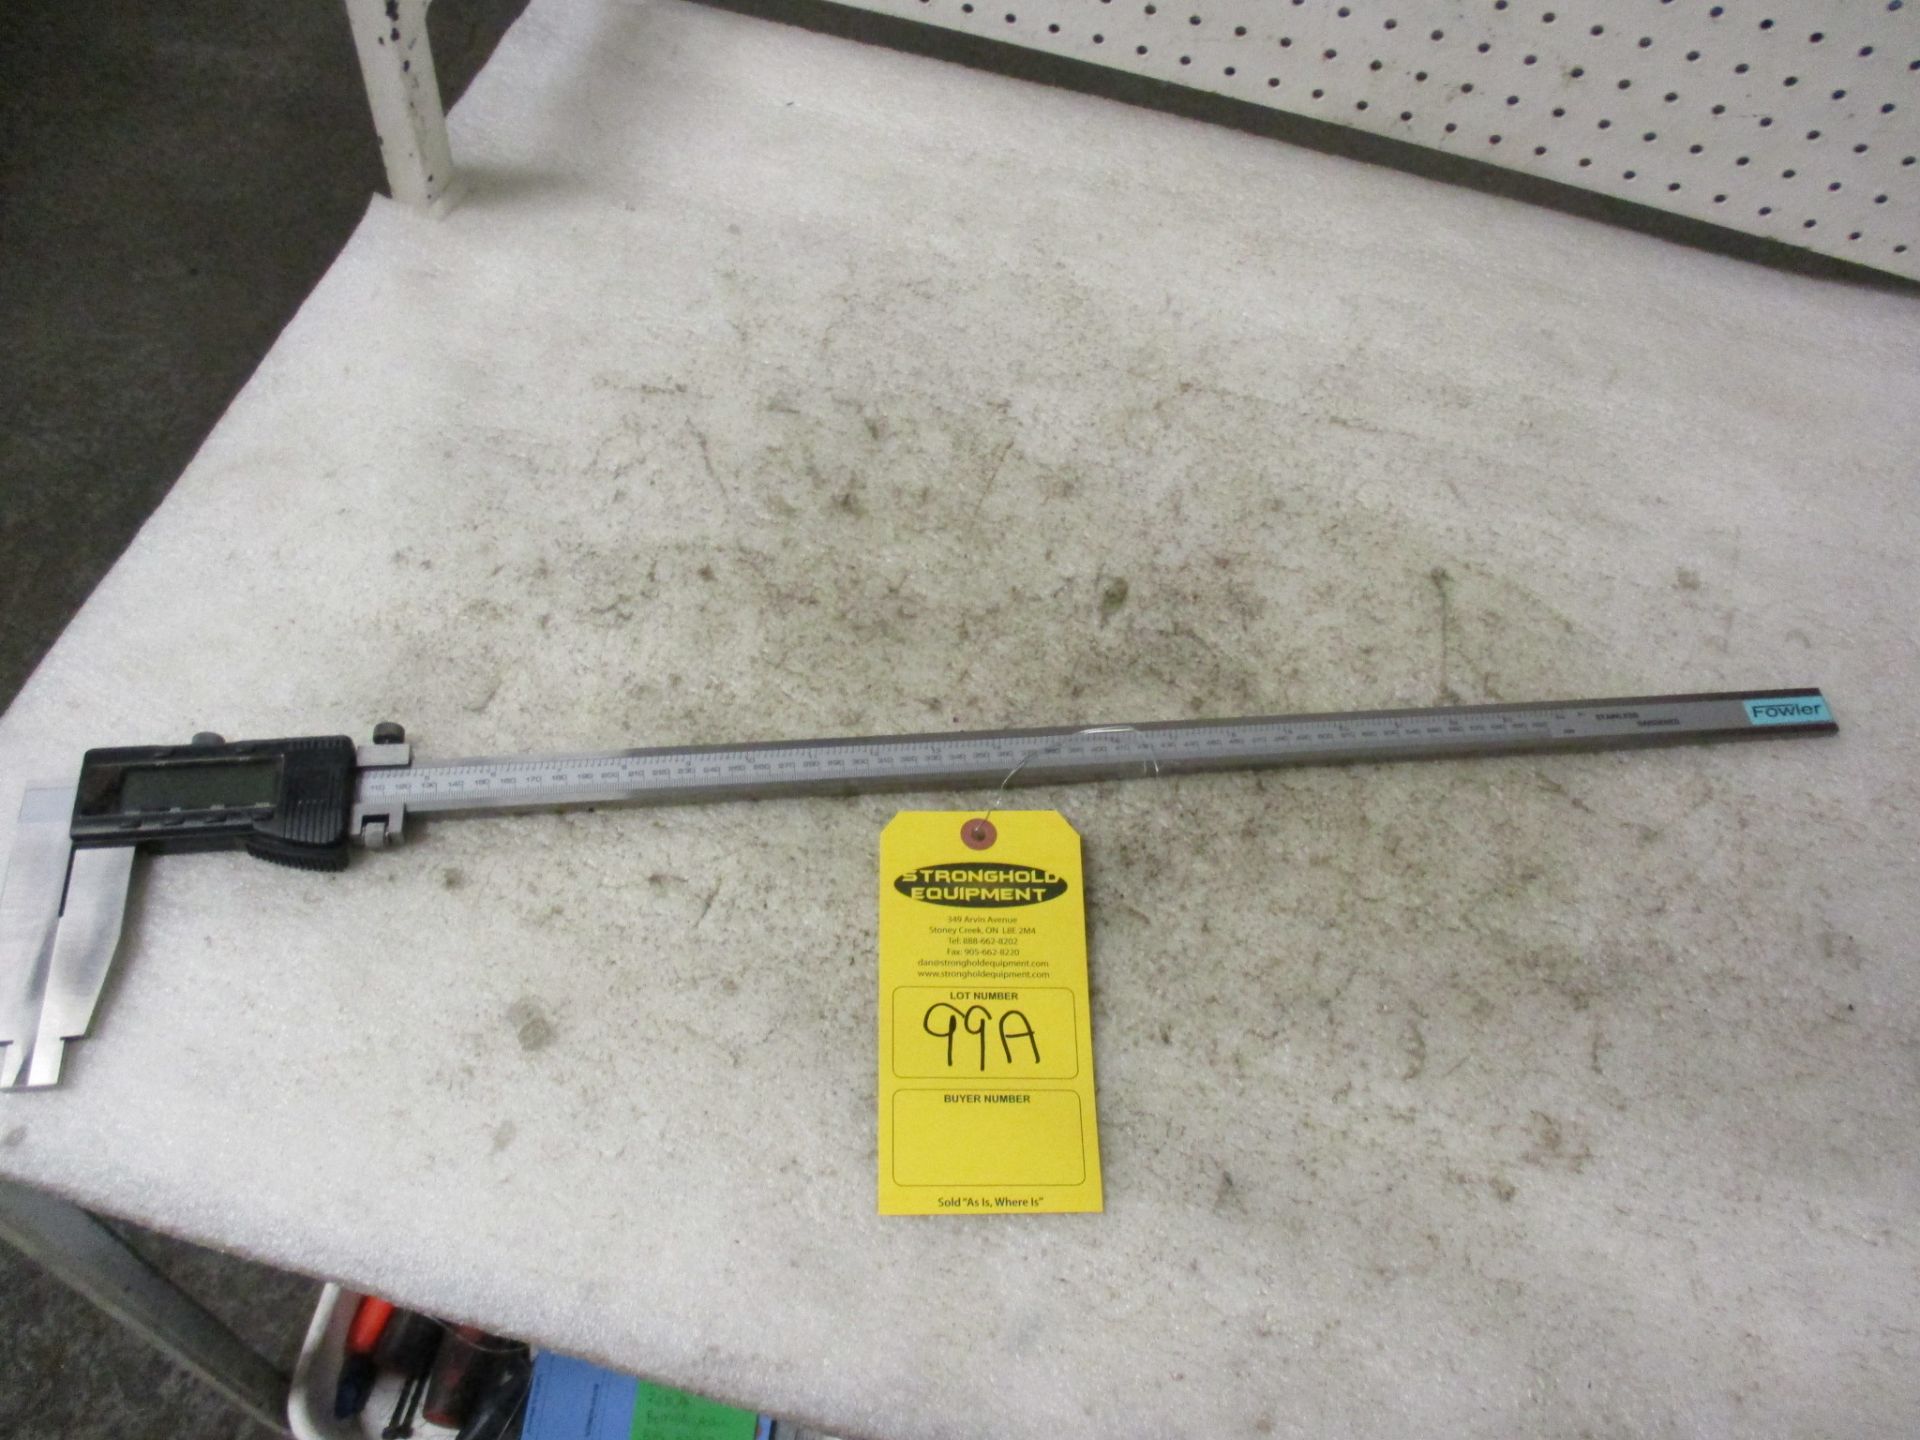 BRAND NEW Fowler 24" / 600mm Digital Caliper - large digital readout display in case - MINT - Image 3 of 3